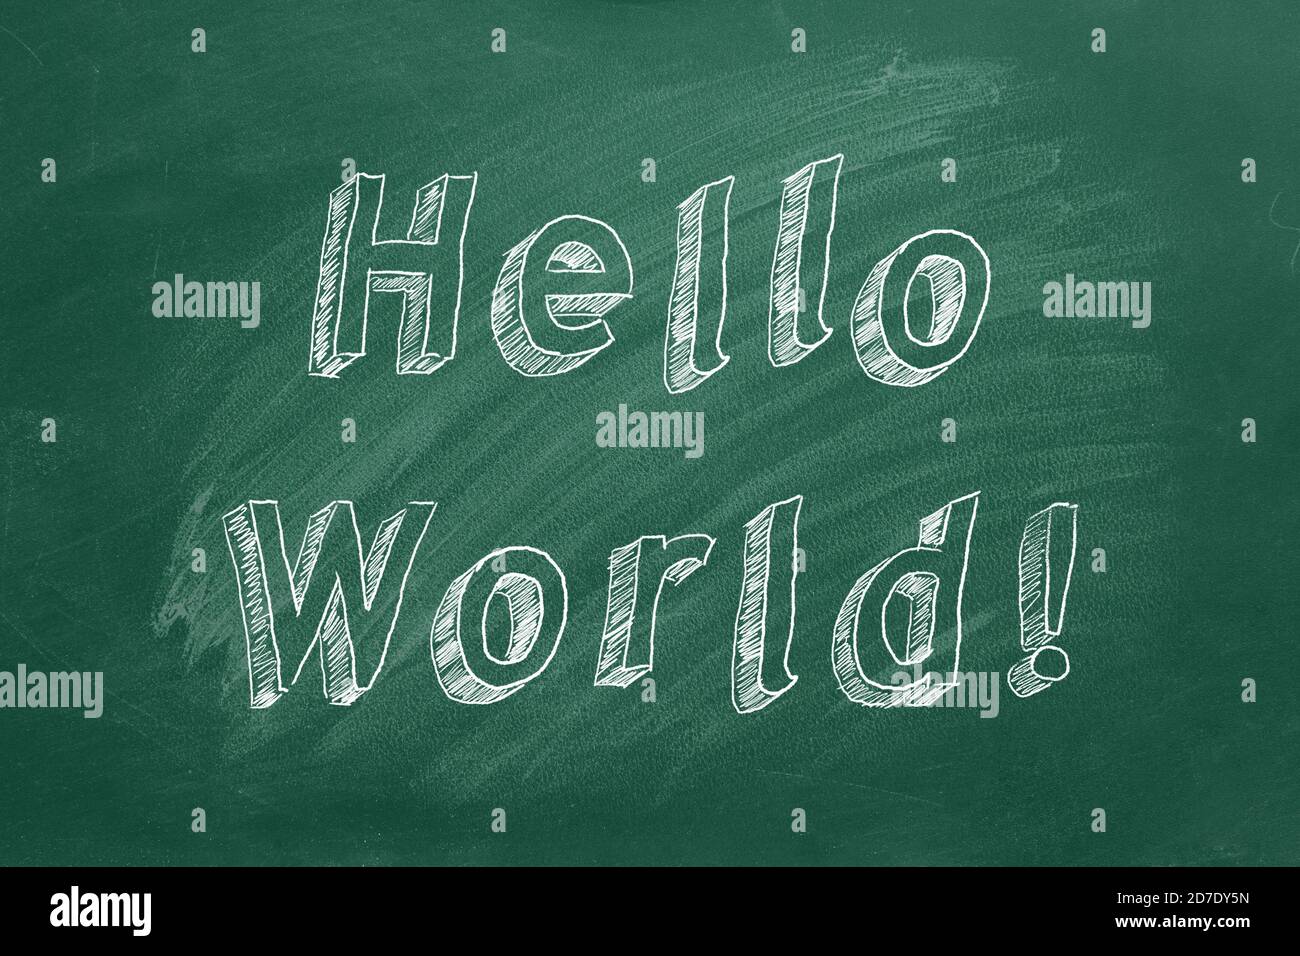 Hand drawing text 'Hello World !' on green chalkboard Stock Photo